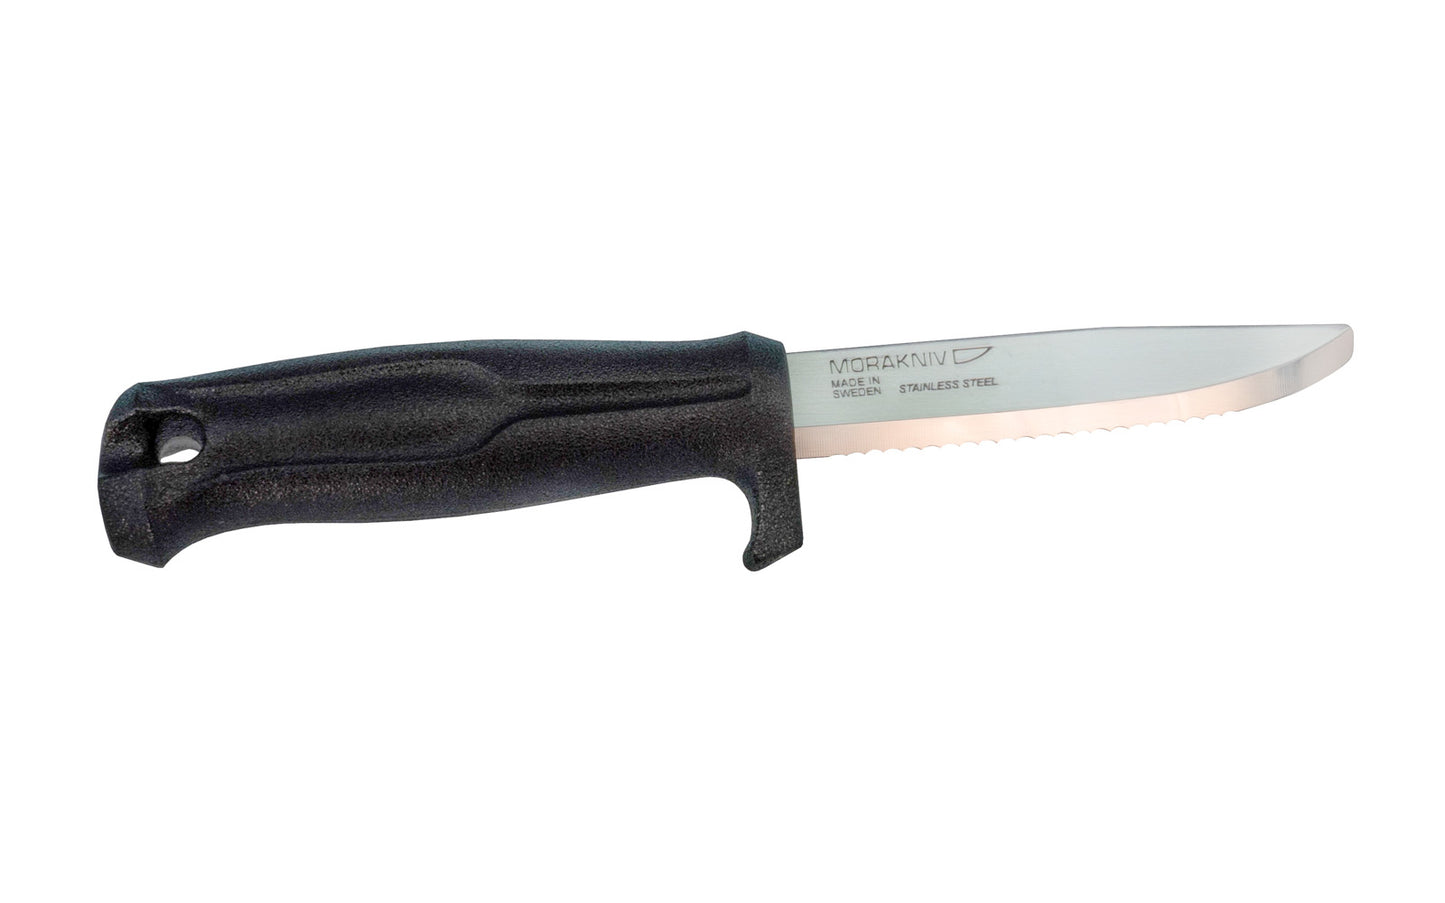 Stainless Steel Serrated "Marine Rescue" knife made by Mora of Sweden. The handle is impact resistant with a large good grip & has a finger guard for safety. It is especially great in an outdoor marine environment. Mora 11529 ~ 7391846003687